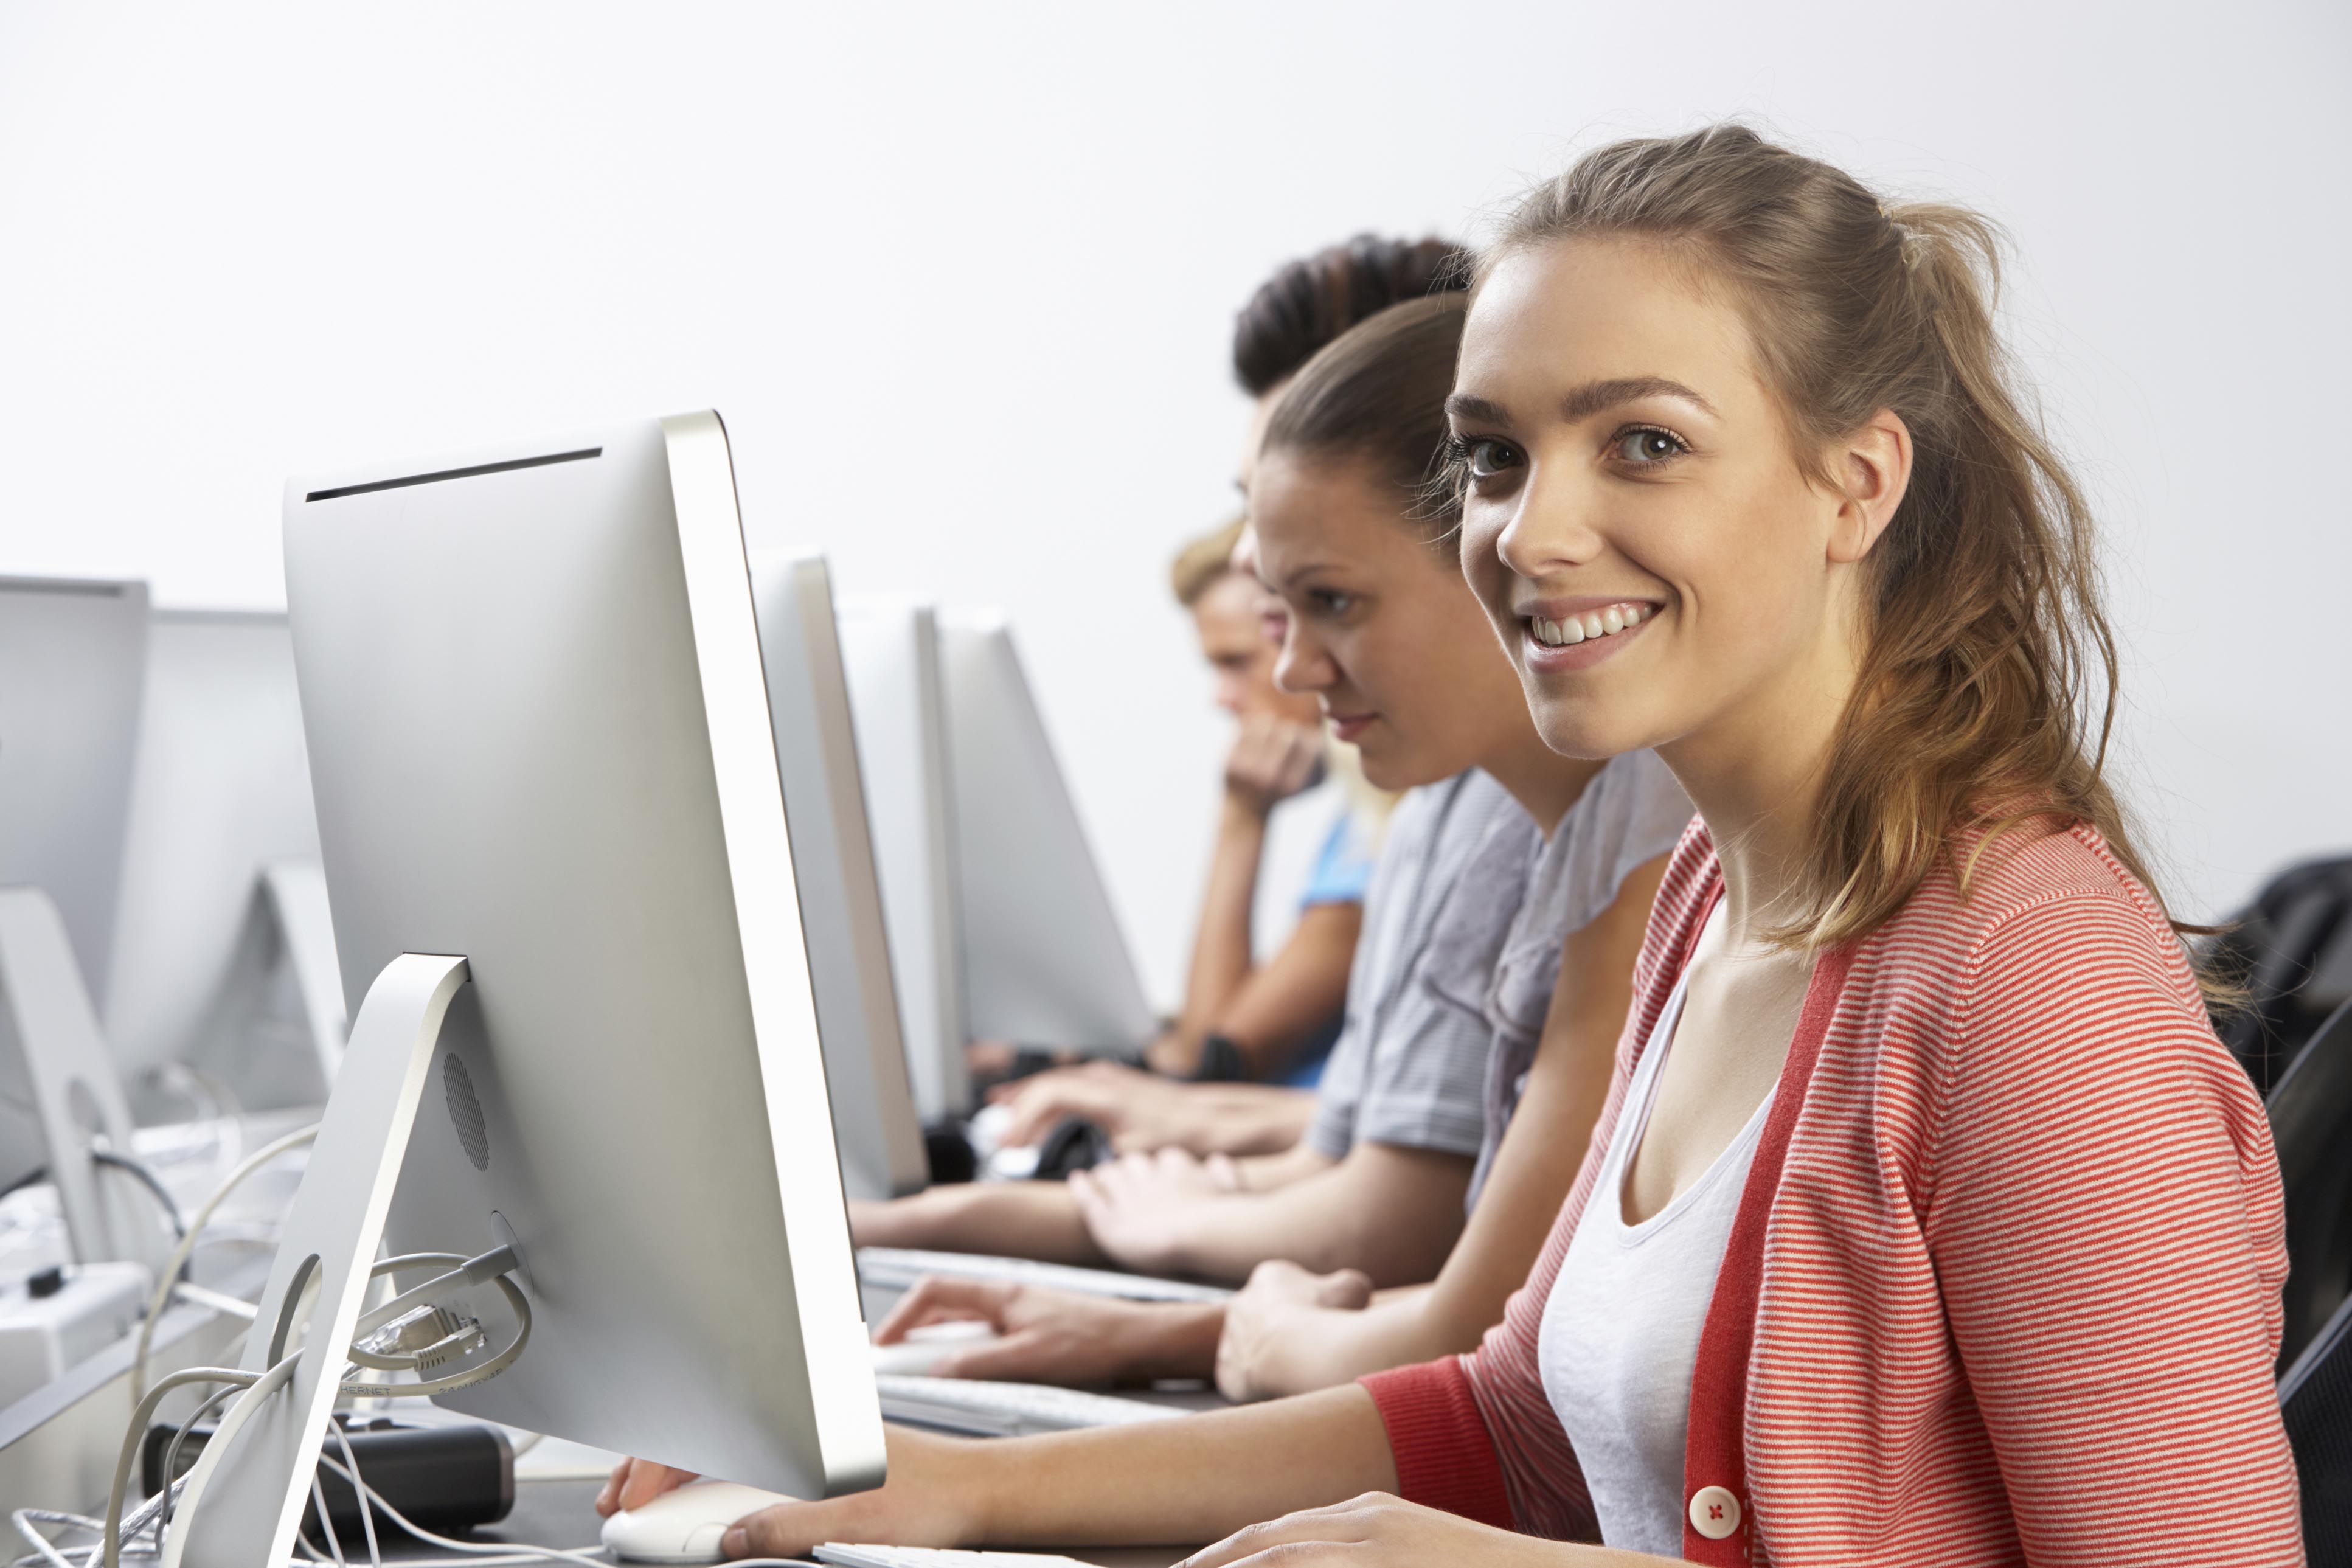 Girl smiling and classmates in background in a computer class.